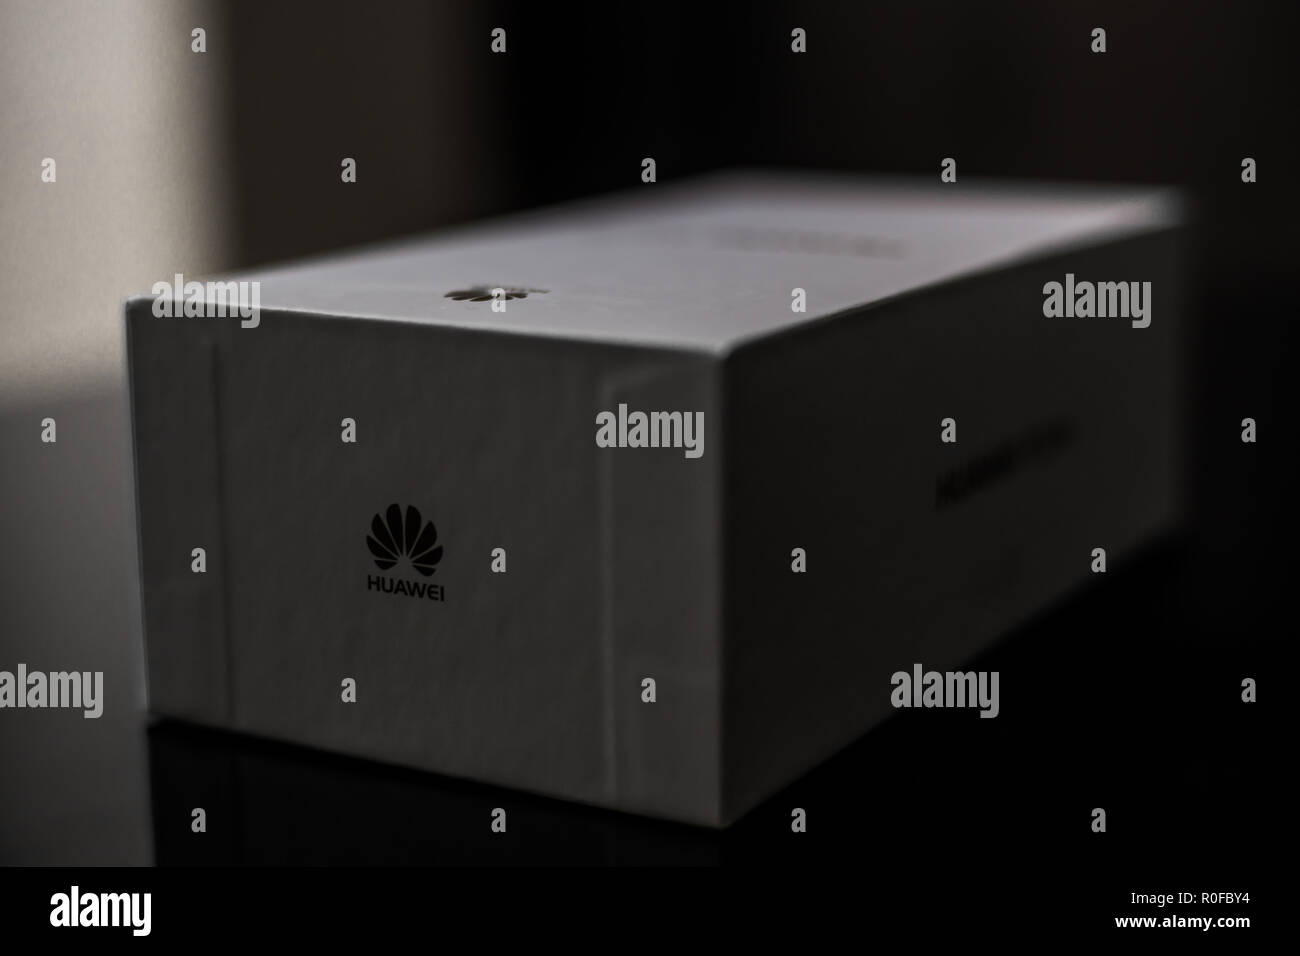 White box of a brand new P20 Lite mobile smartphone made by Chinese technology brand Huawei on a shiny black surface Stock Photo